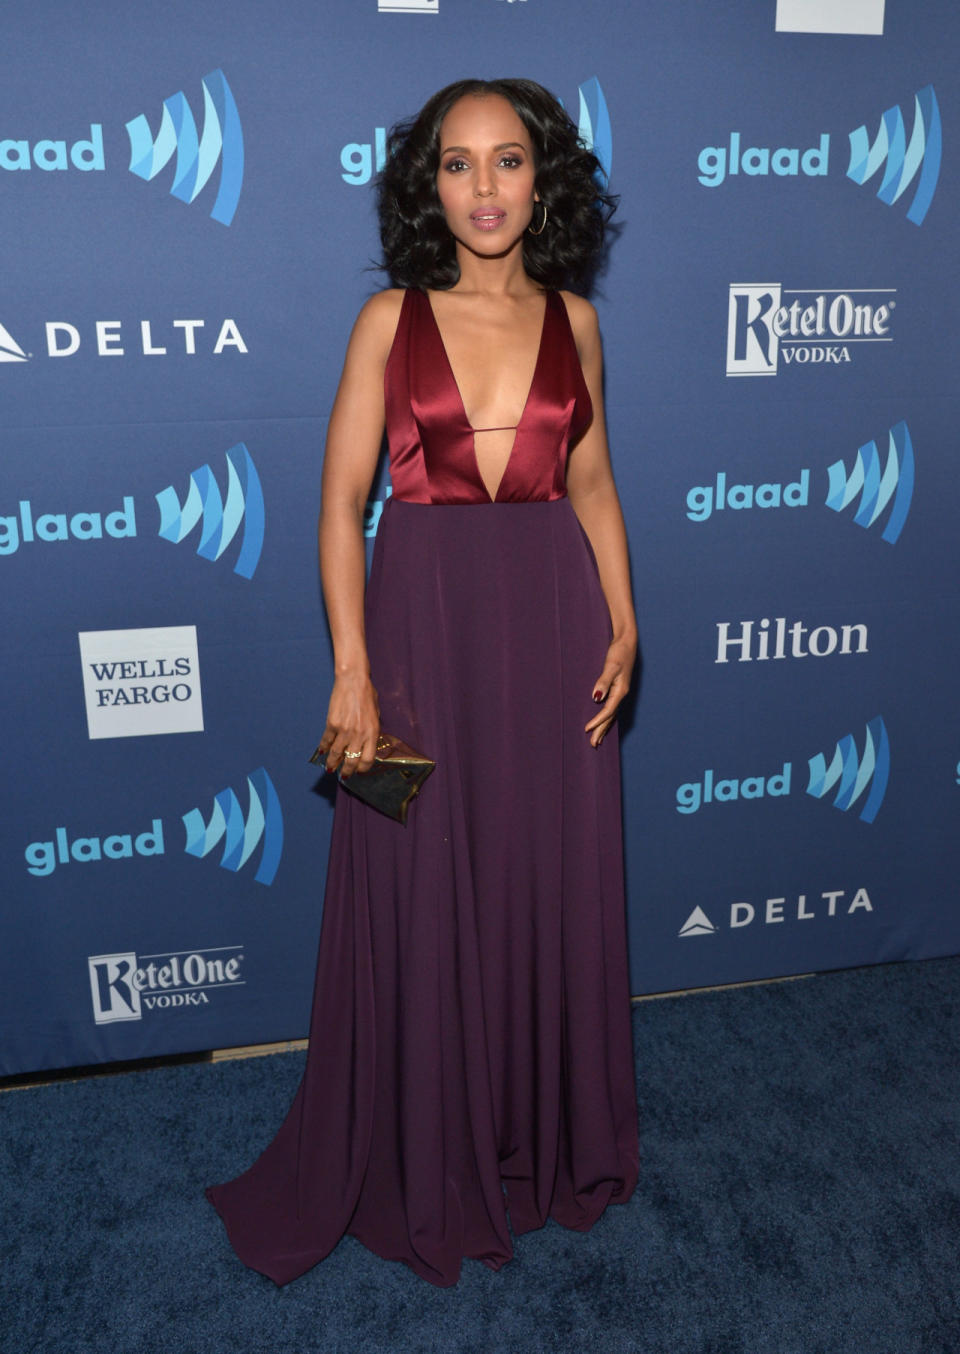 The “Scandal” actress, who received the 2015 Vanguard Award, stunned in a maroon and eggplant floor-length dress with a dangerously low neckline.